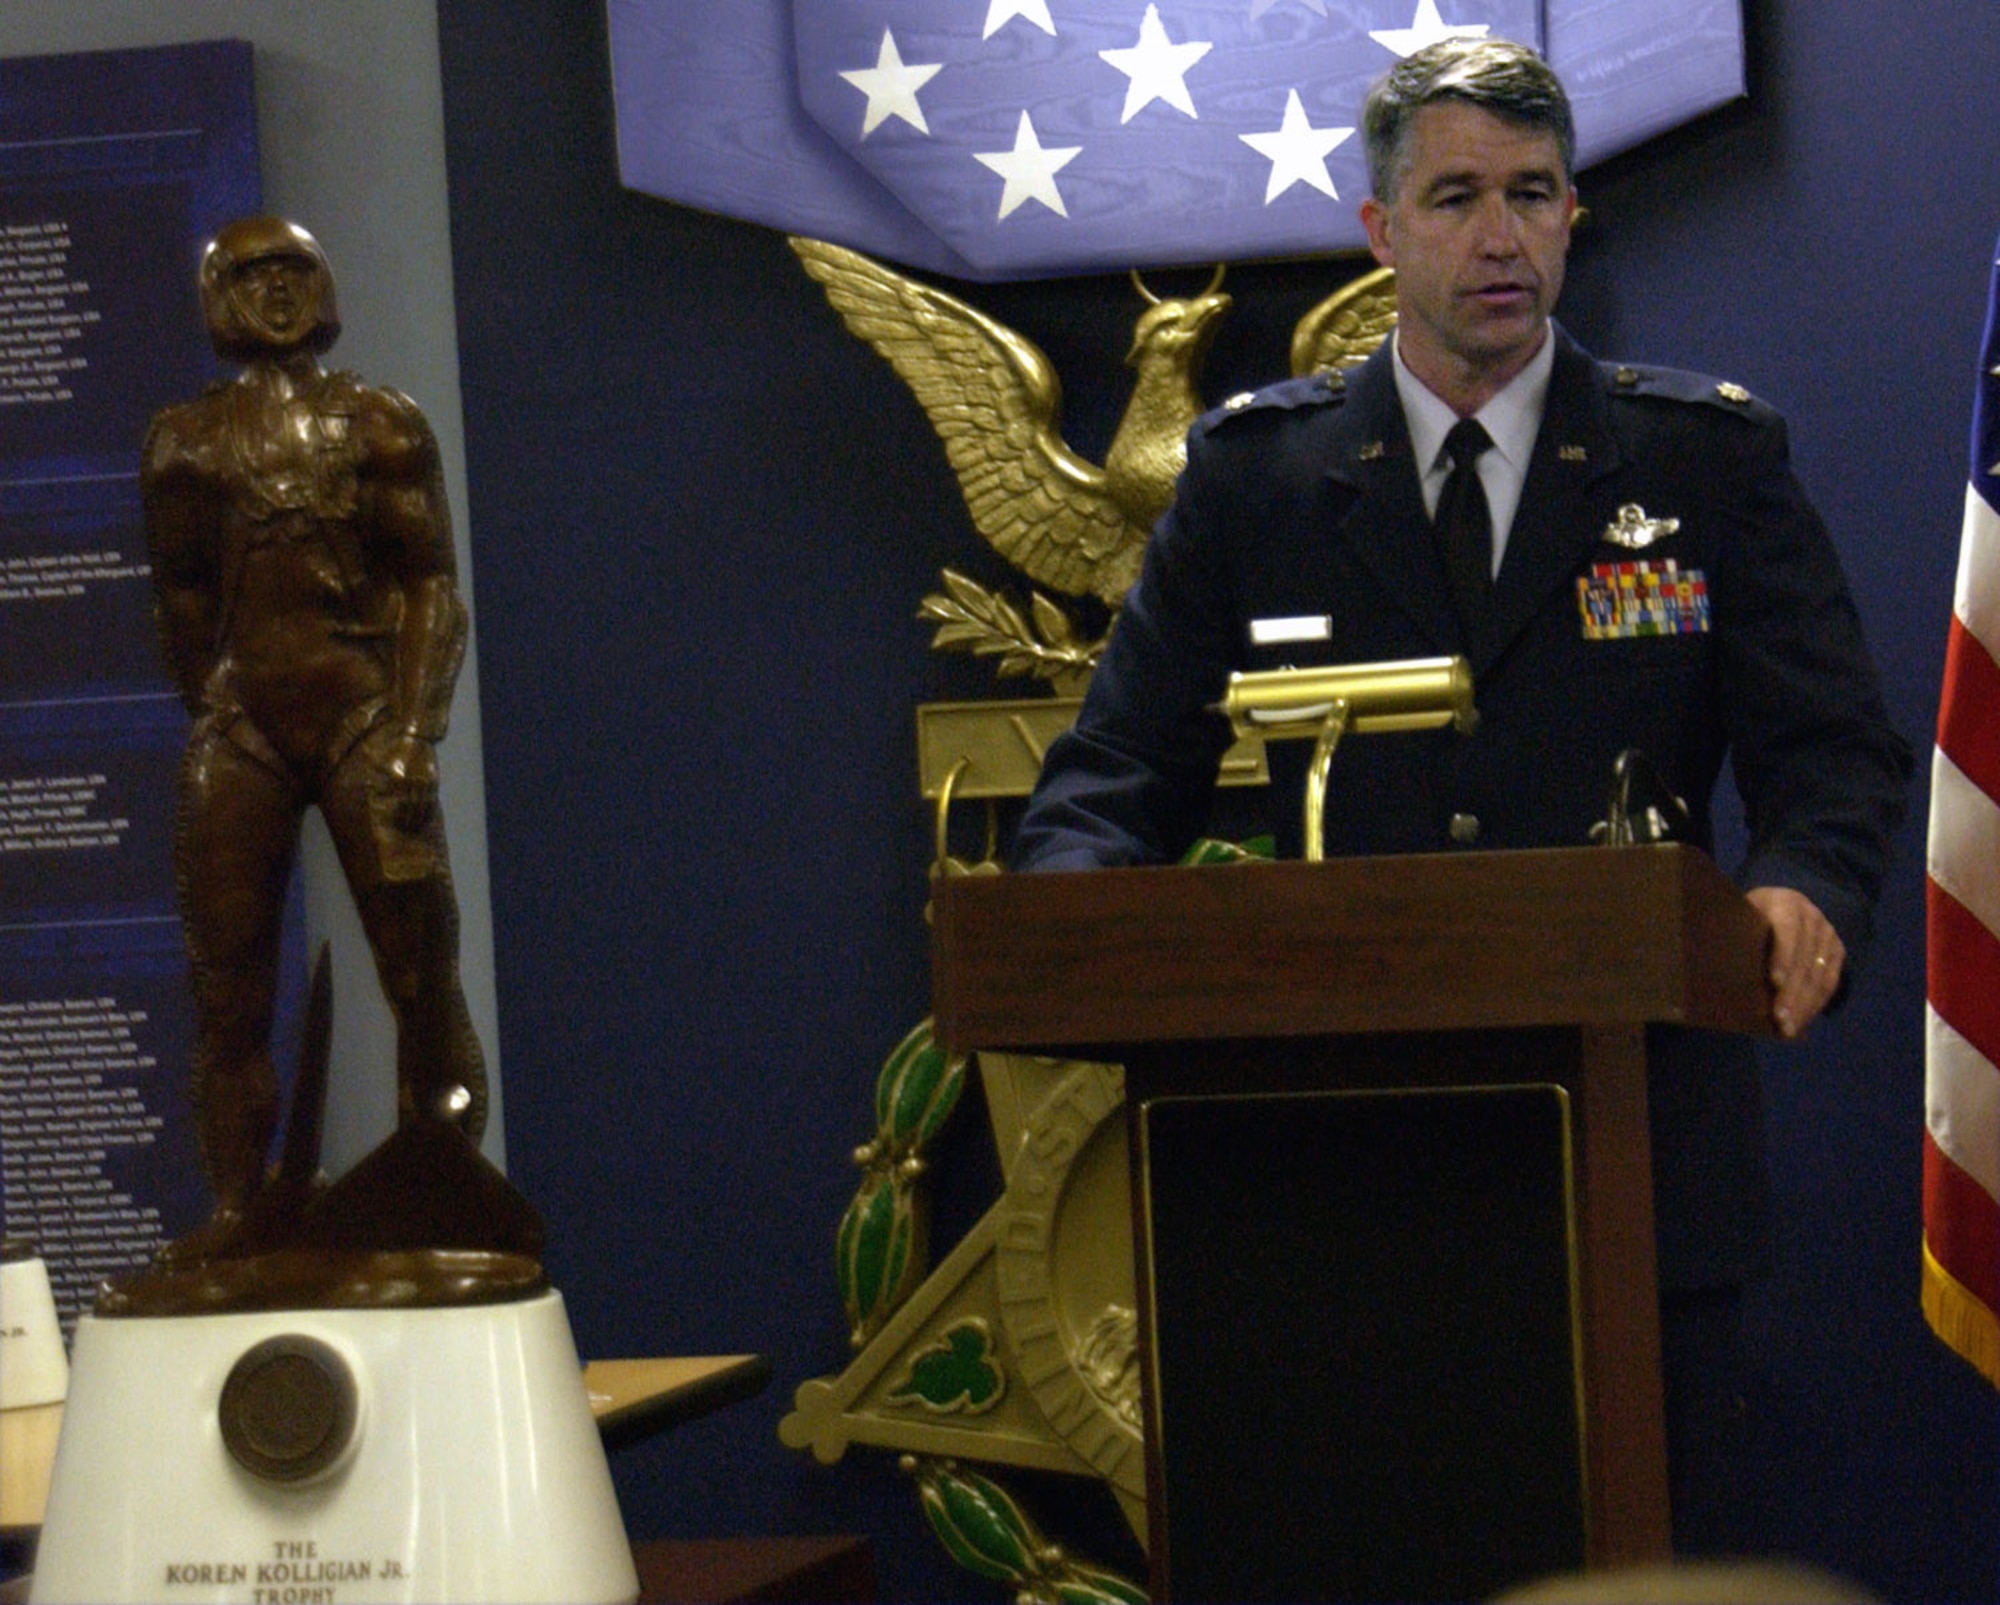 Lt. Col. Peter Byrne thanks his family, friends and coworkers during a ceremony June 5 at the Pentagon's Hall of Heroes. He was awarded the Koren Kolligian Jr. Trophy, which stands in the foreground. Colonel Byrne, the 140th Wing vice commander, earned the award from an incident in June 2006 when he suffered a stroke while flying an F-16 but was able to safely land the plane 90 minutes later.  (U.S. Air Force photo/Staff Sgt. J.G. Buzanowski)